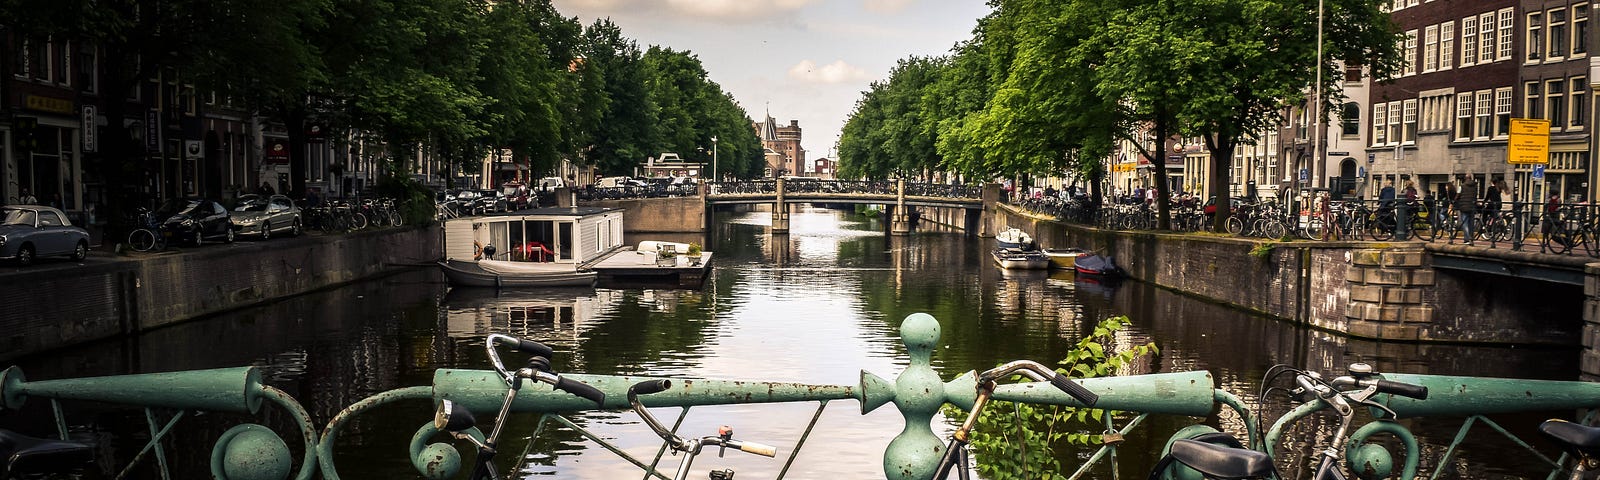 A view of an Amsterdam canal with several vintage bicycles in the foreground.